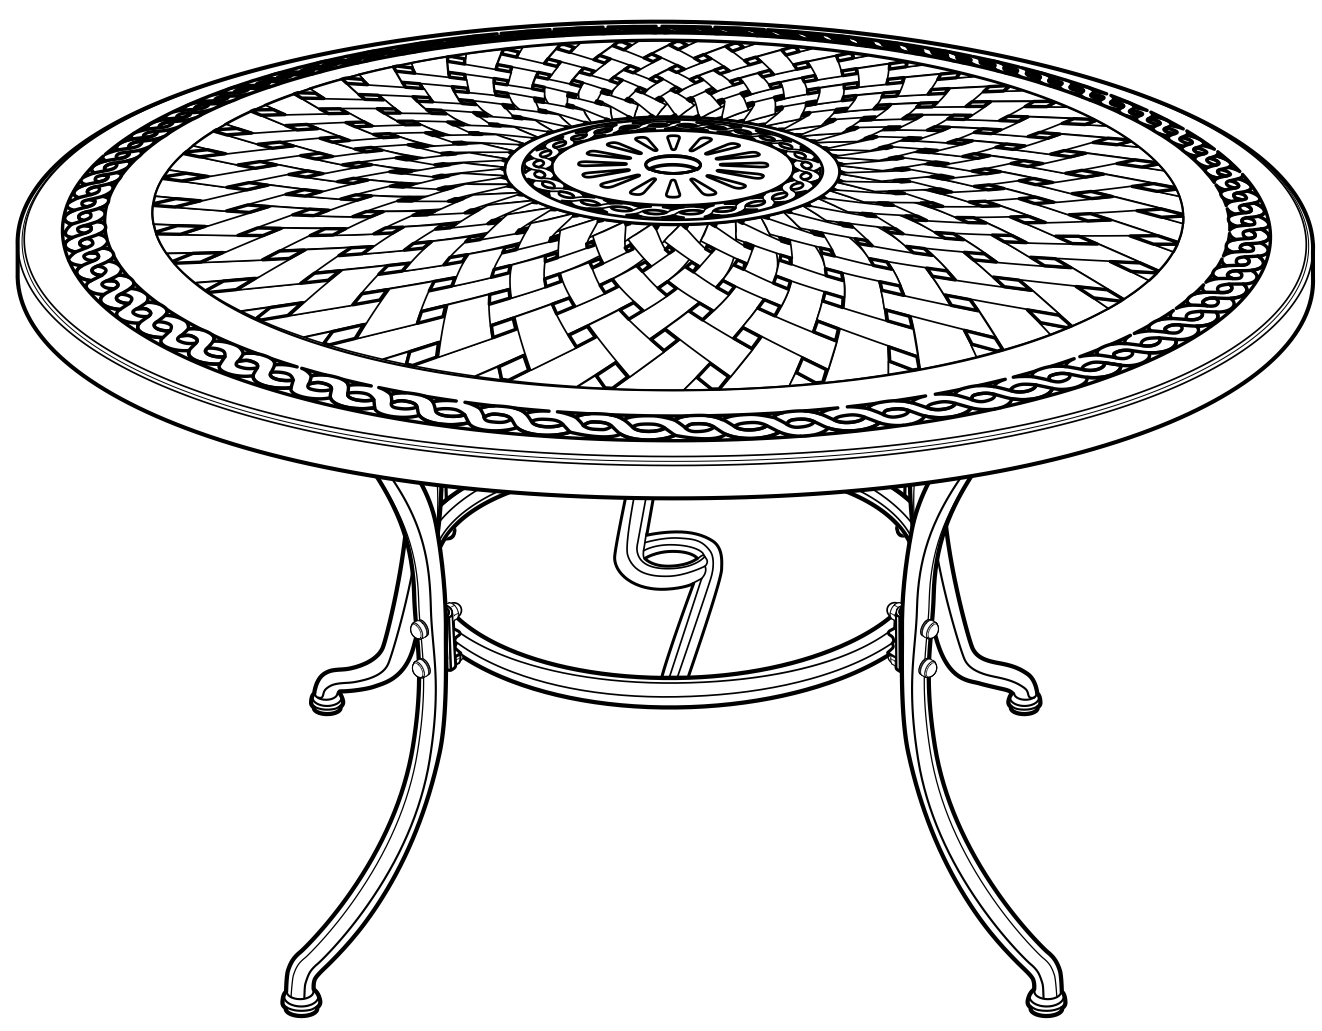 Technical Illustration of our Frances Garden Dining Tables